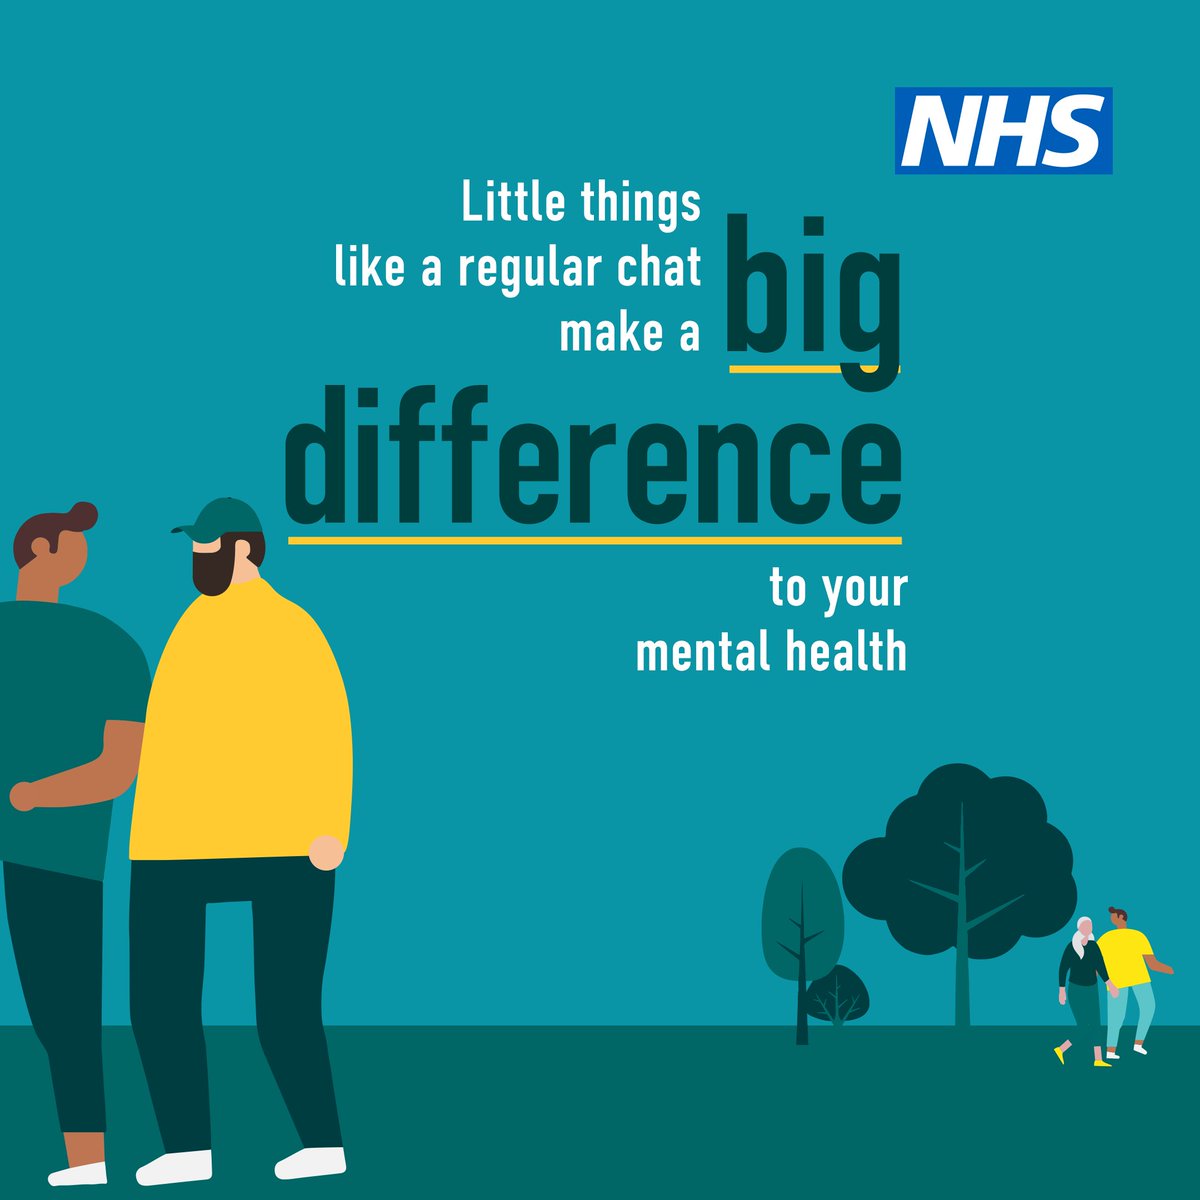 Talking to someone about how you are feeling can improve your mental health and wellbeing. Little things can make a big difference. Find out more ➡️ nhs.uk/every-mind-mat… #MentalHealthAwarenessWeek